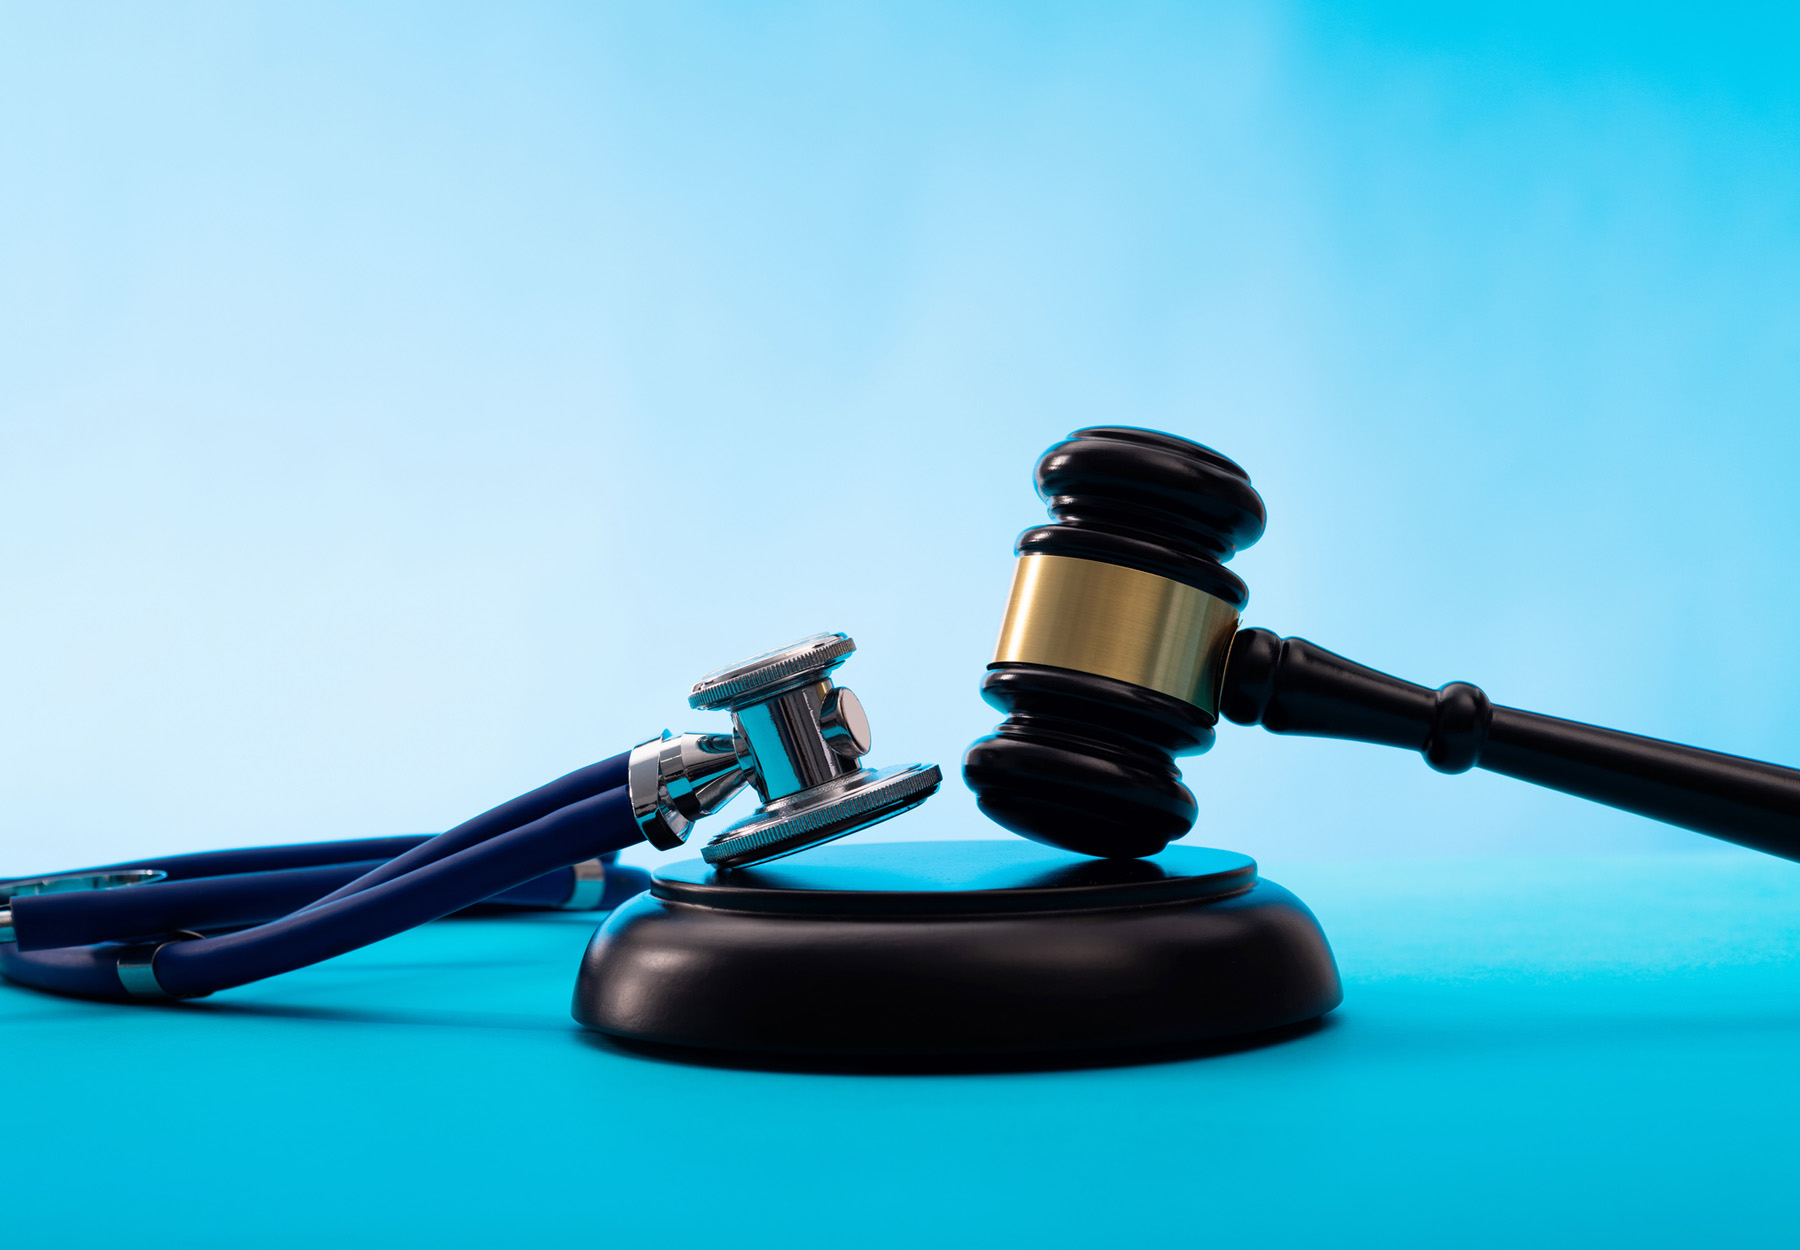 Judge's gavel and stethoscope on a blue background. Stock image.